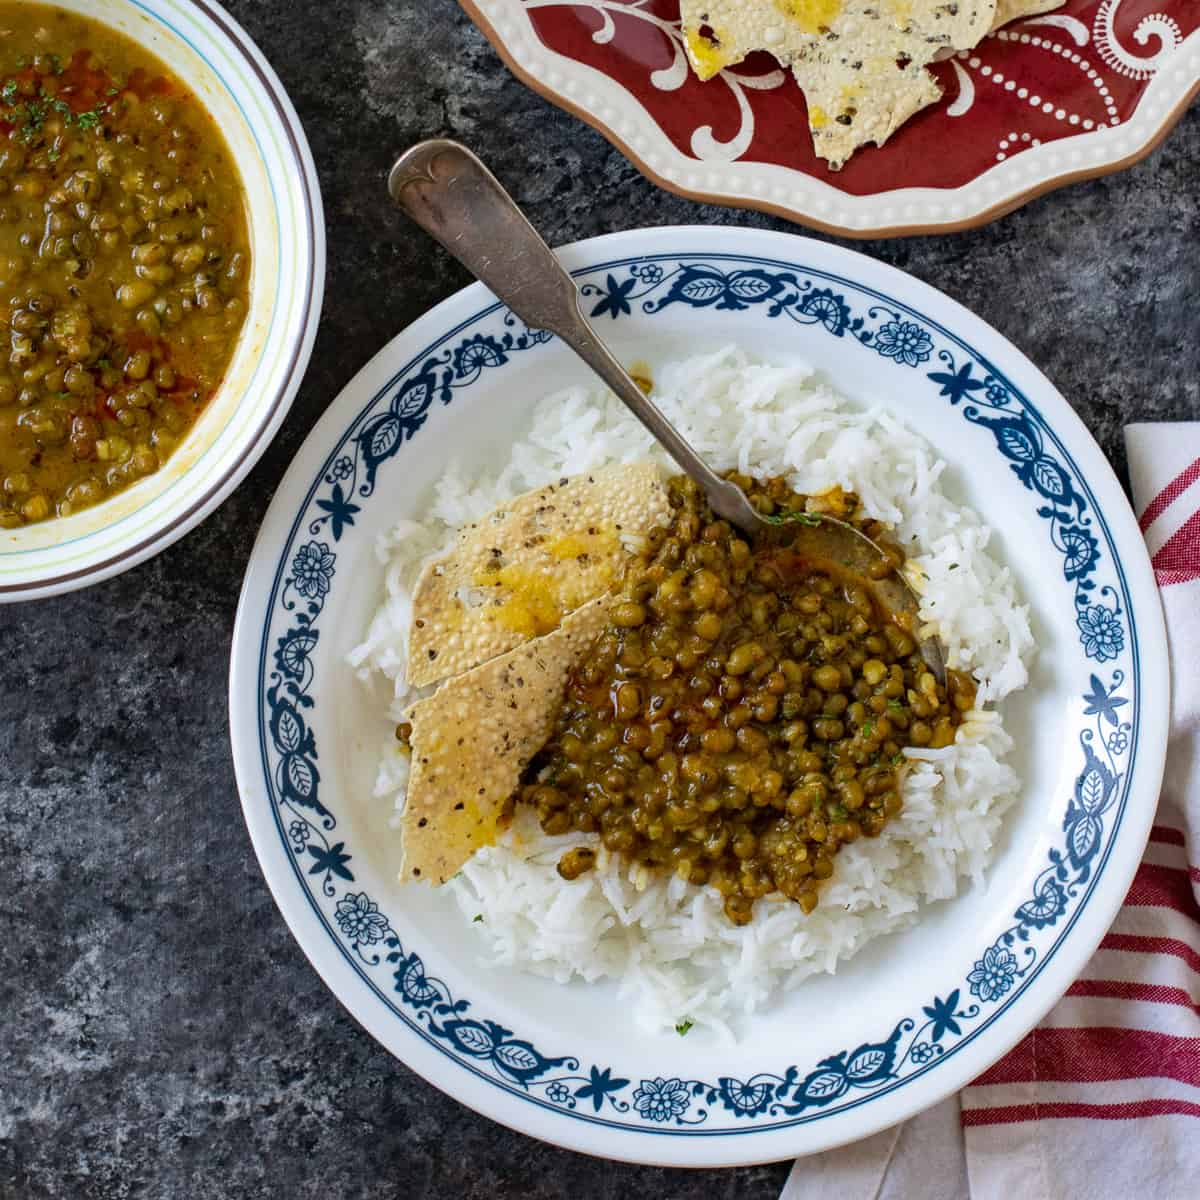 Green moong dal served with rice and papad